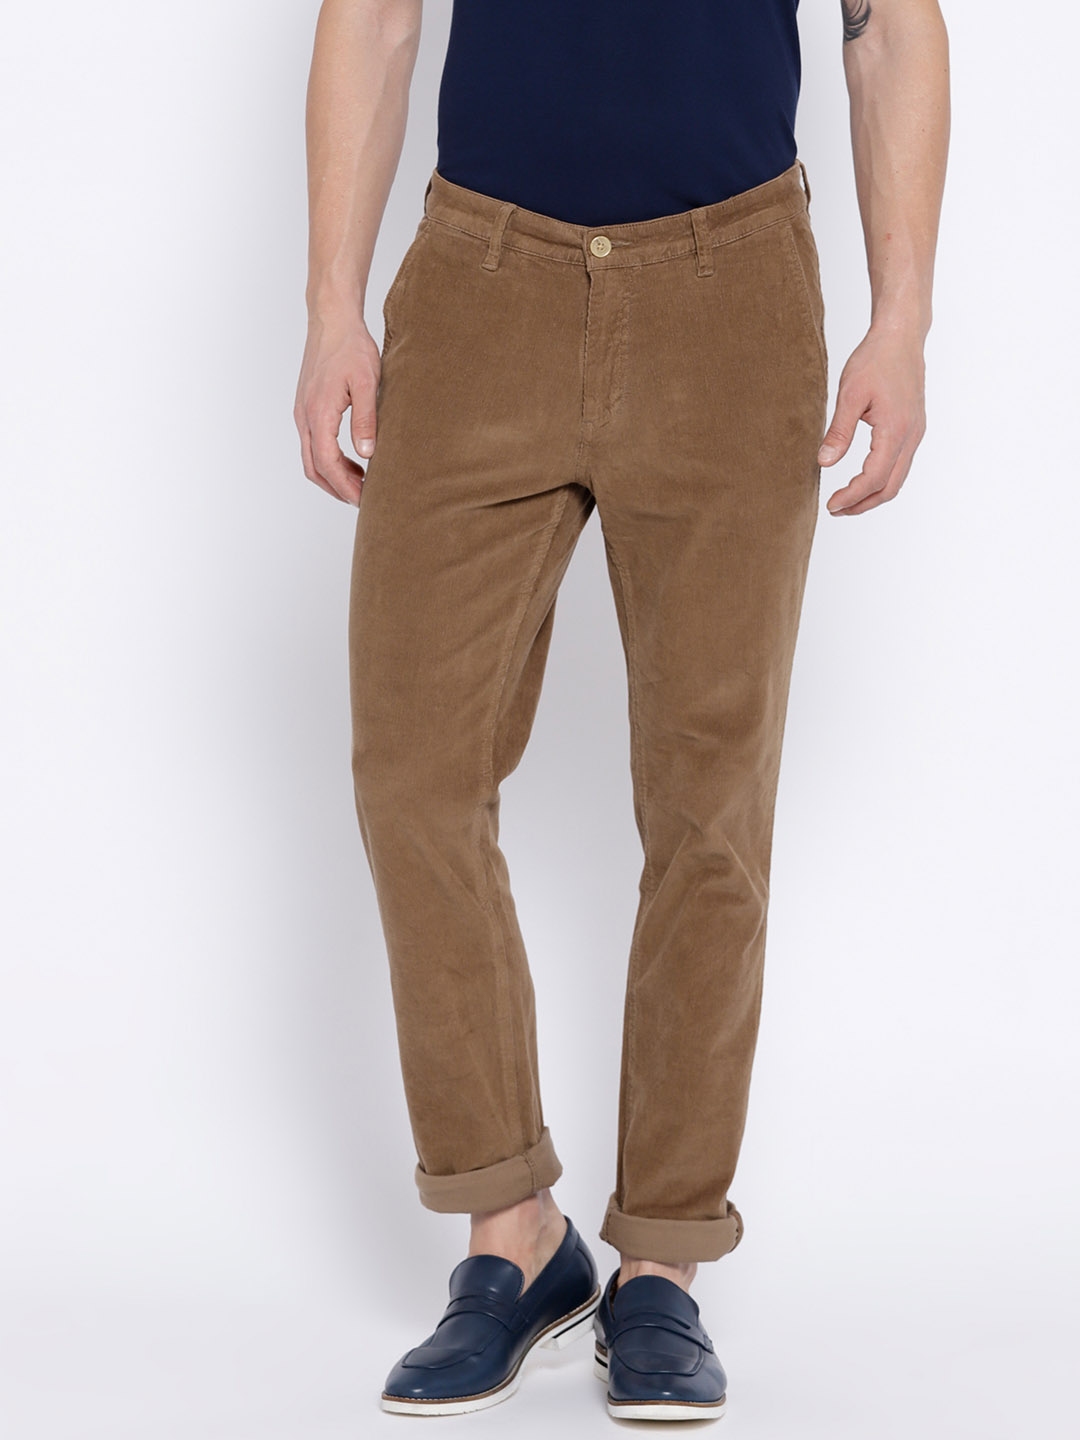 Olive Solid JOHN PLAYERS SELECT TROUSER Skinny Fit